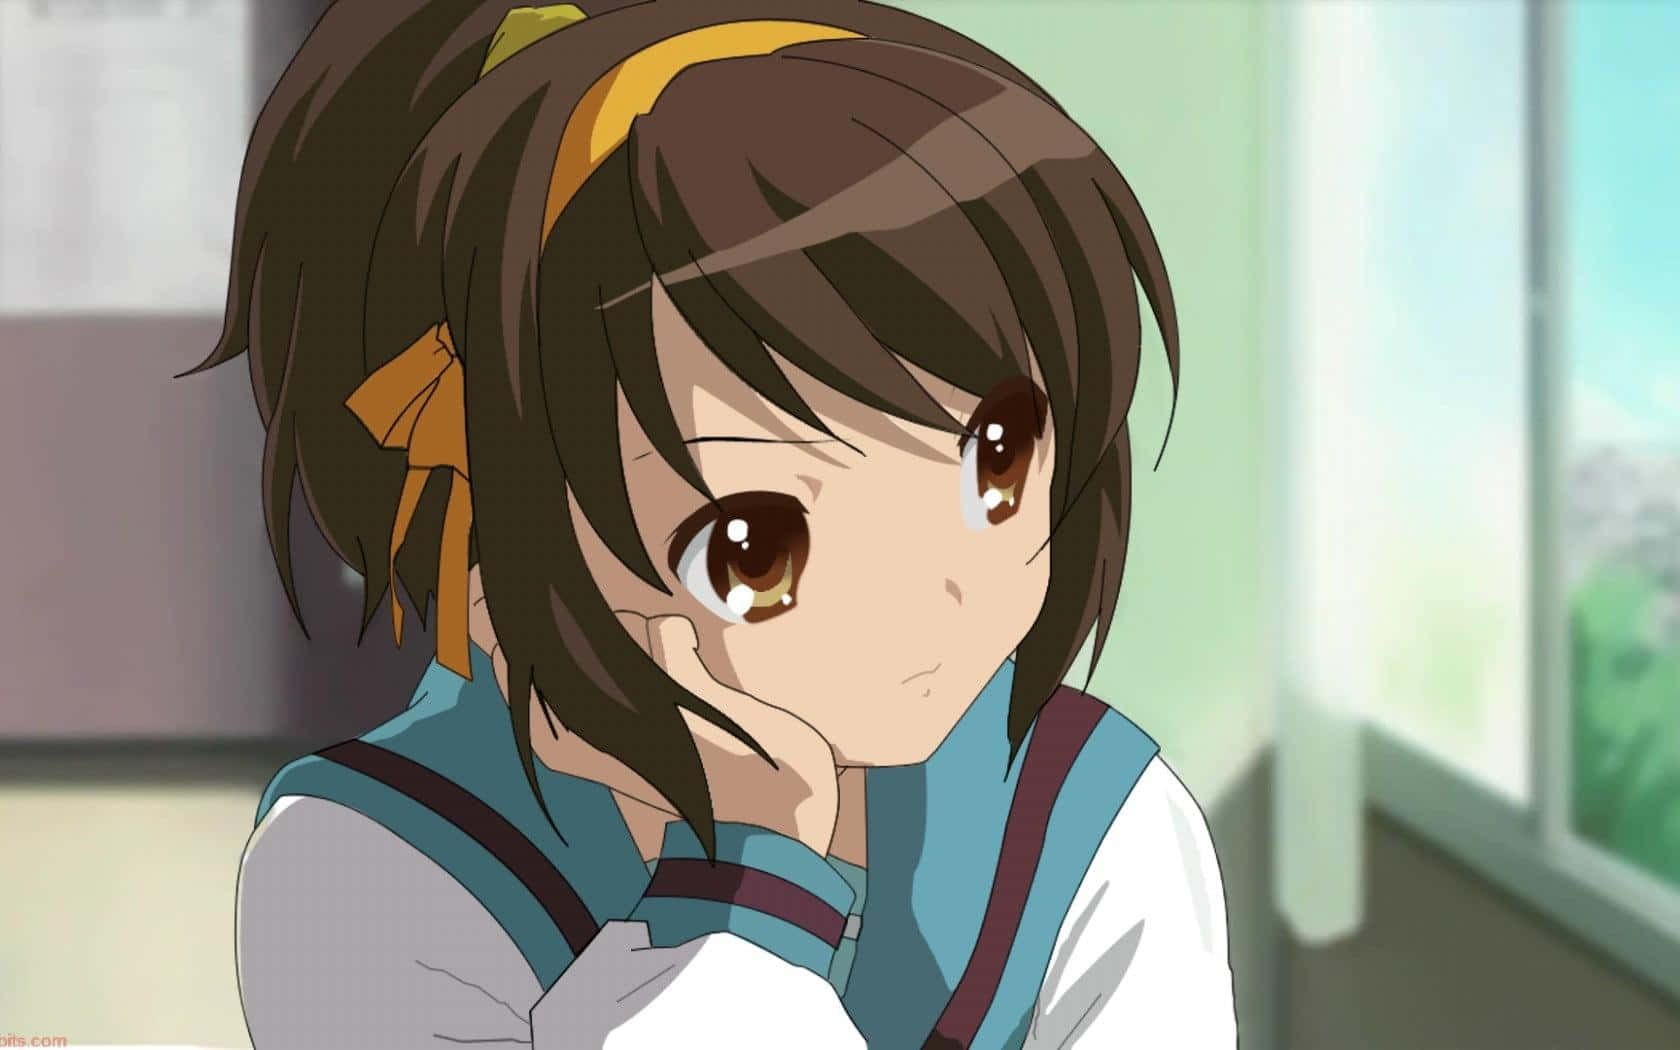 Optimistic Haruhi Suzumiya with her hands wide open in front of beautiful fireworks Wallpaper